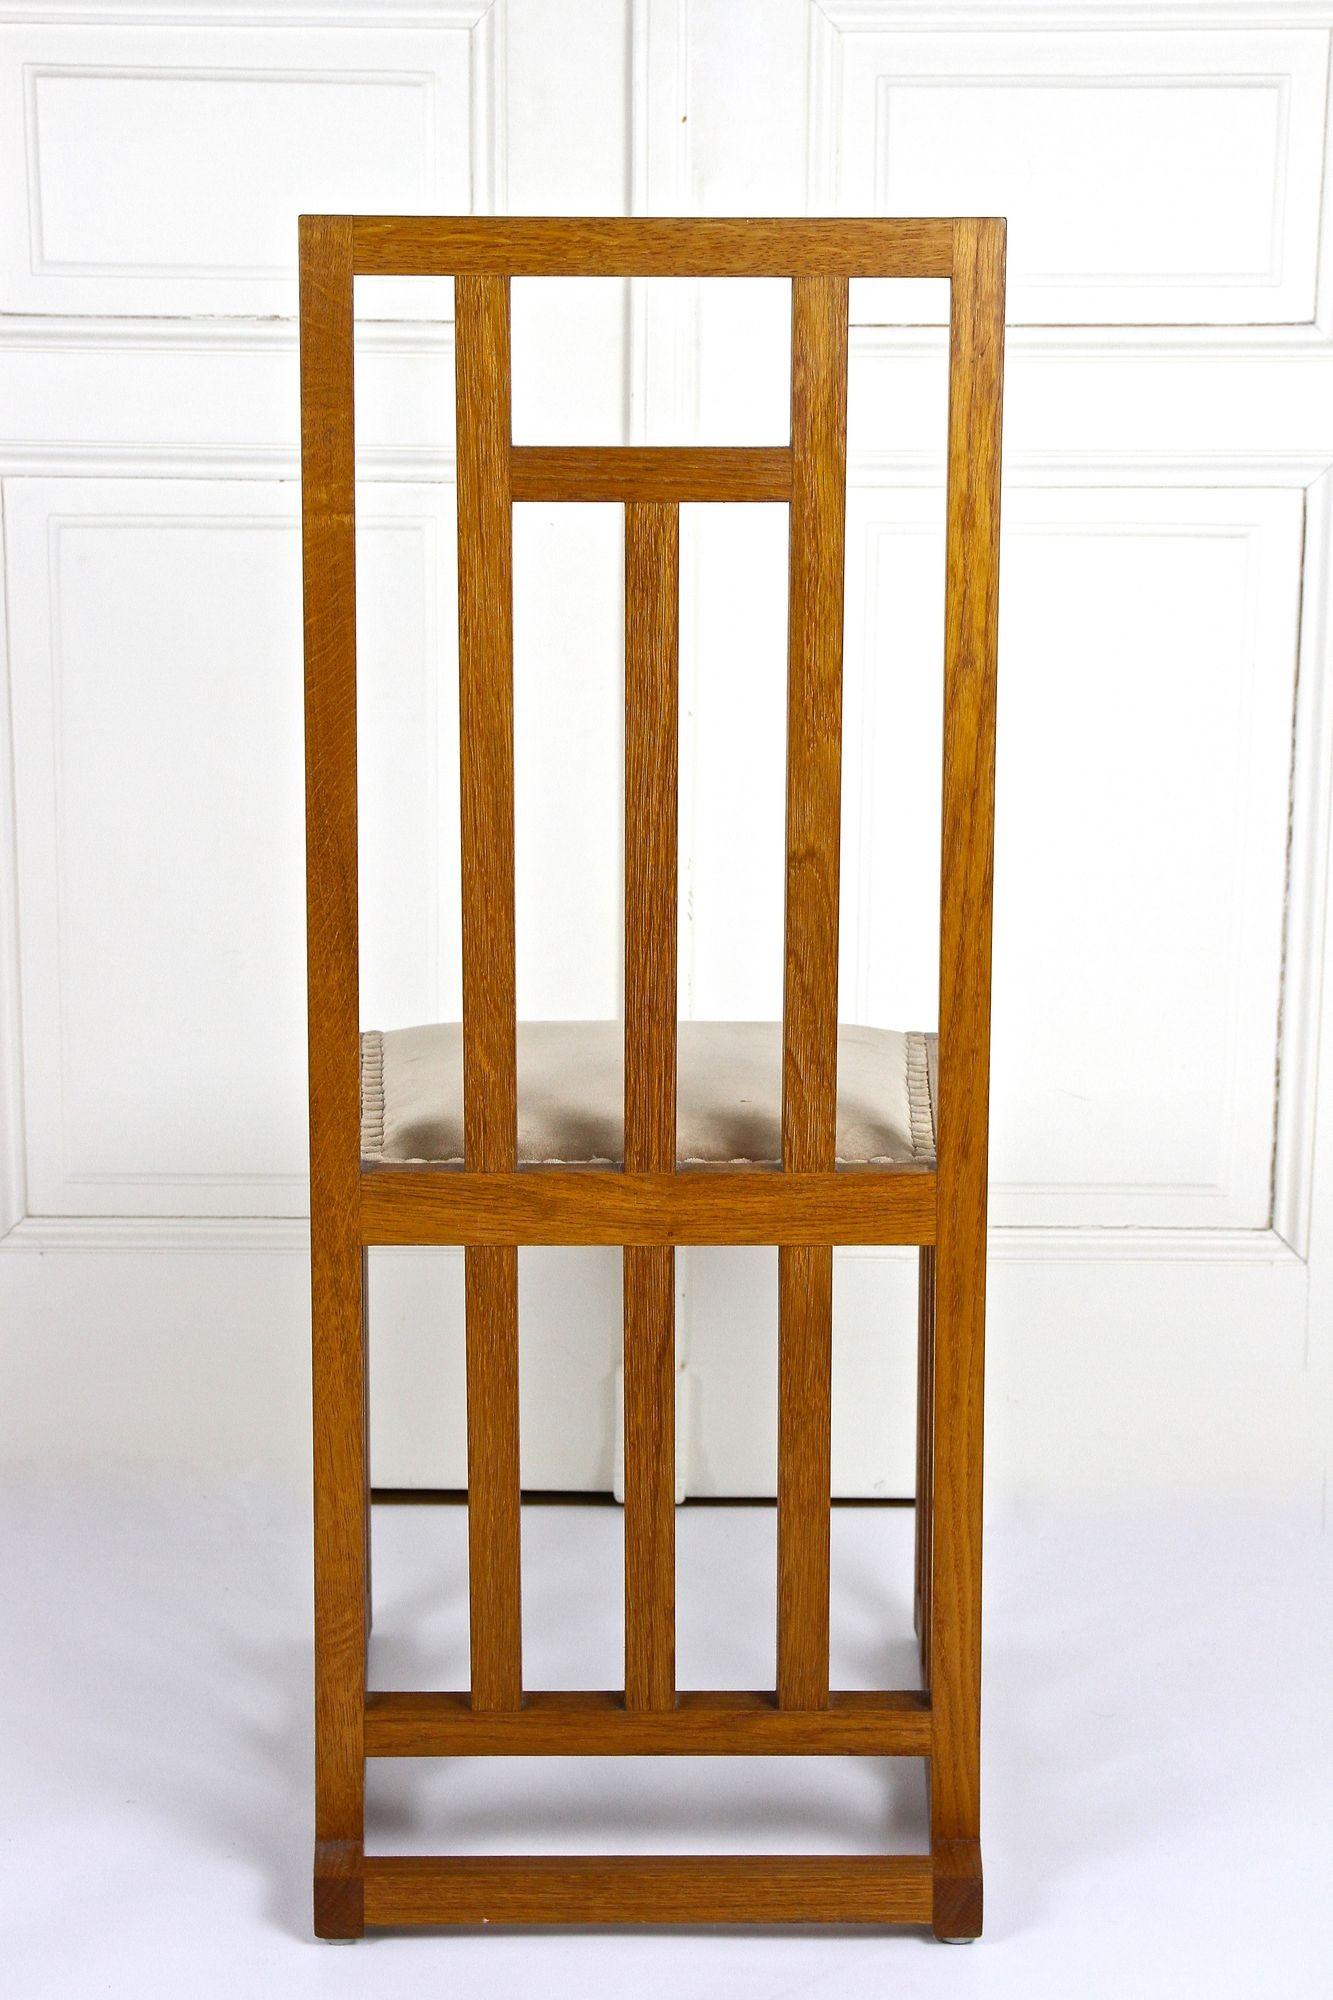 Set Of 6 Art Nouveau Dining Chairs by Josef Hoffmann, 20th Century, AT ca. 1901 For Sale 3